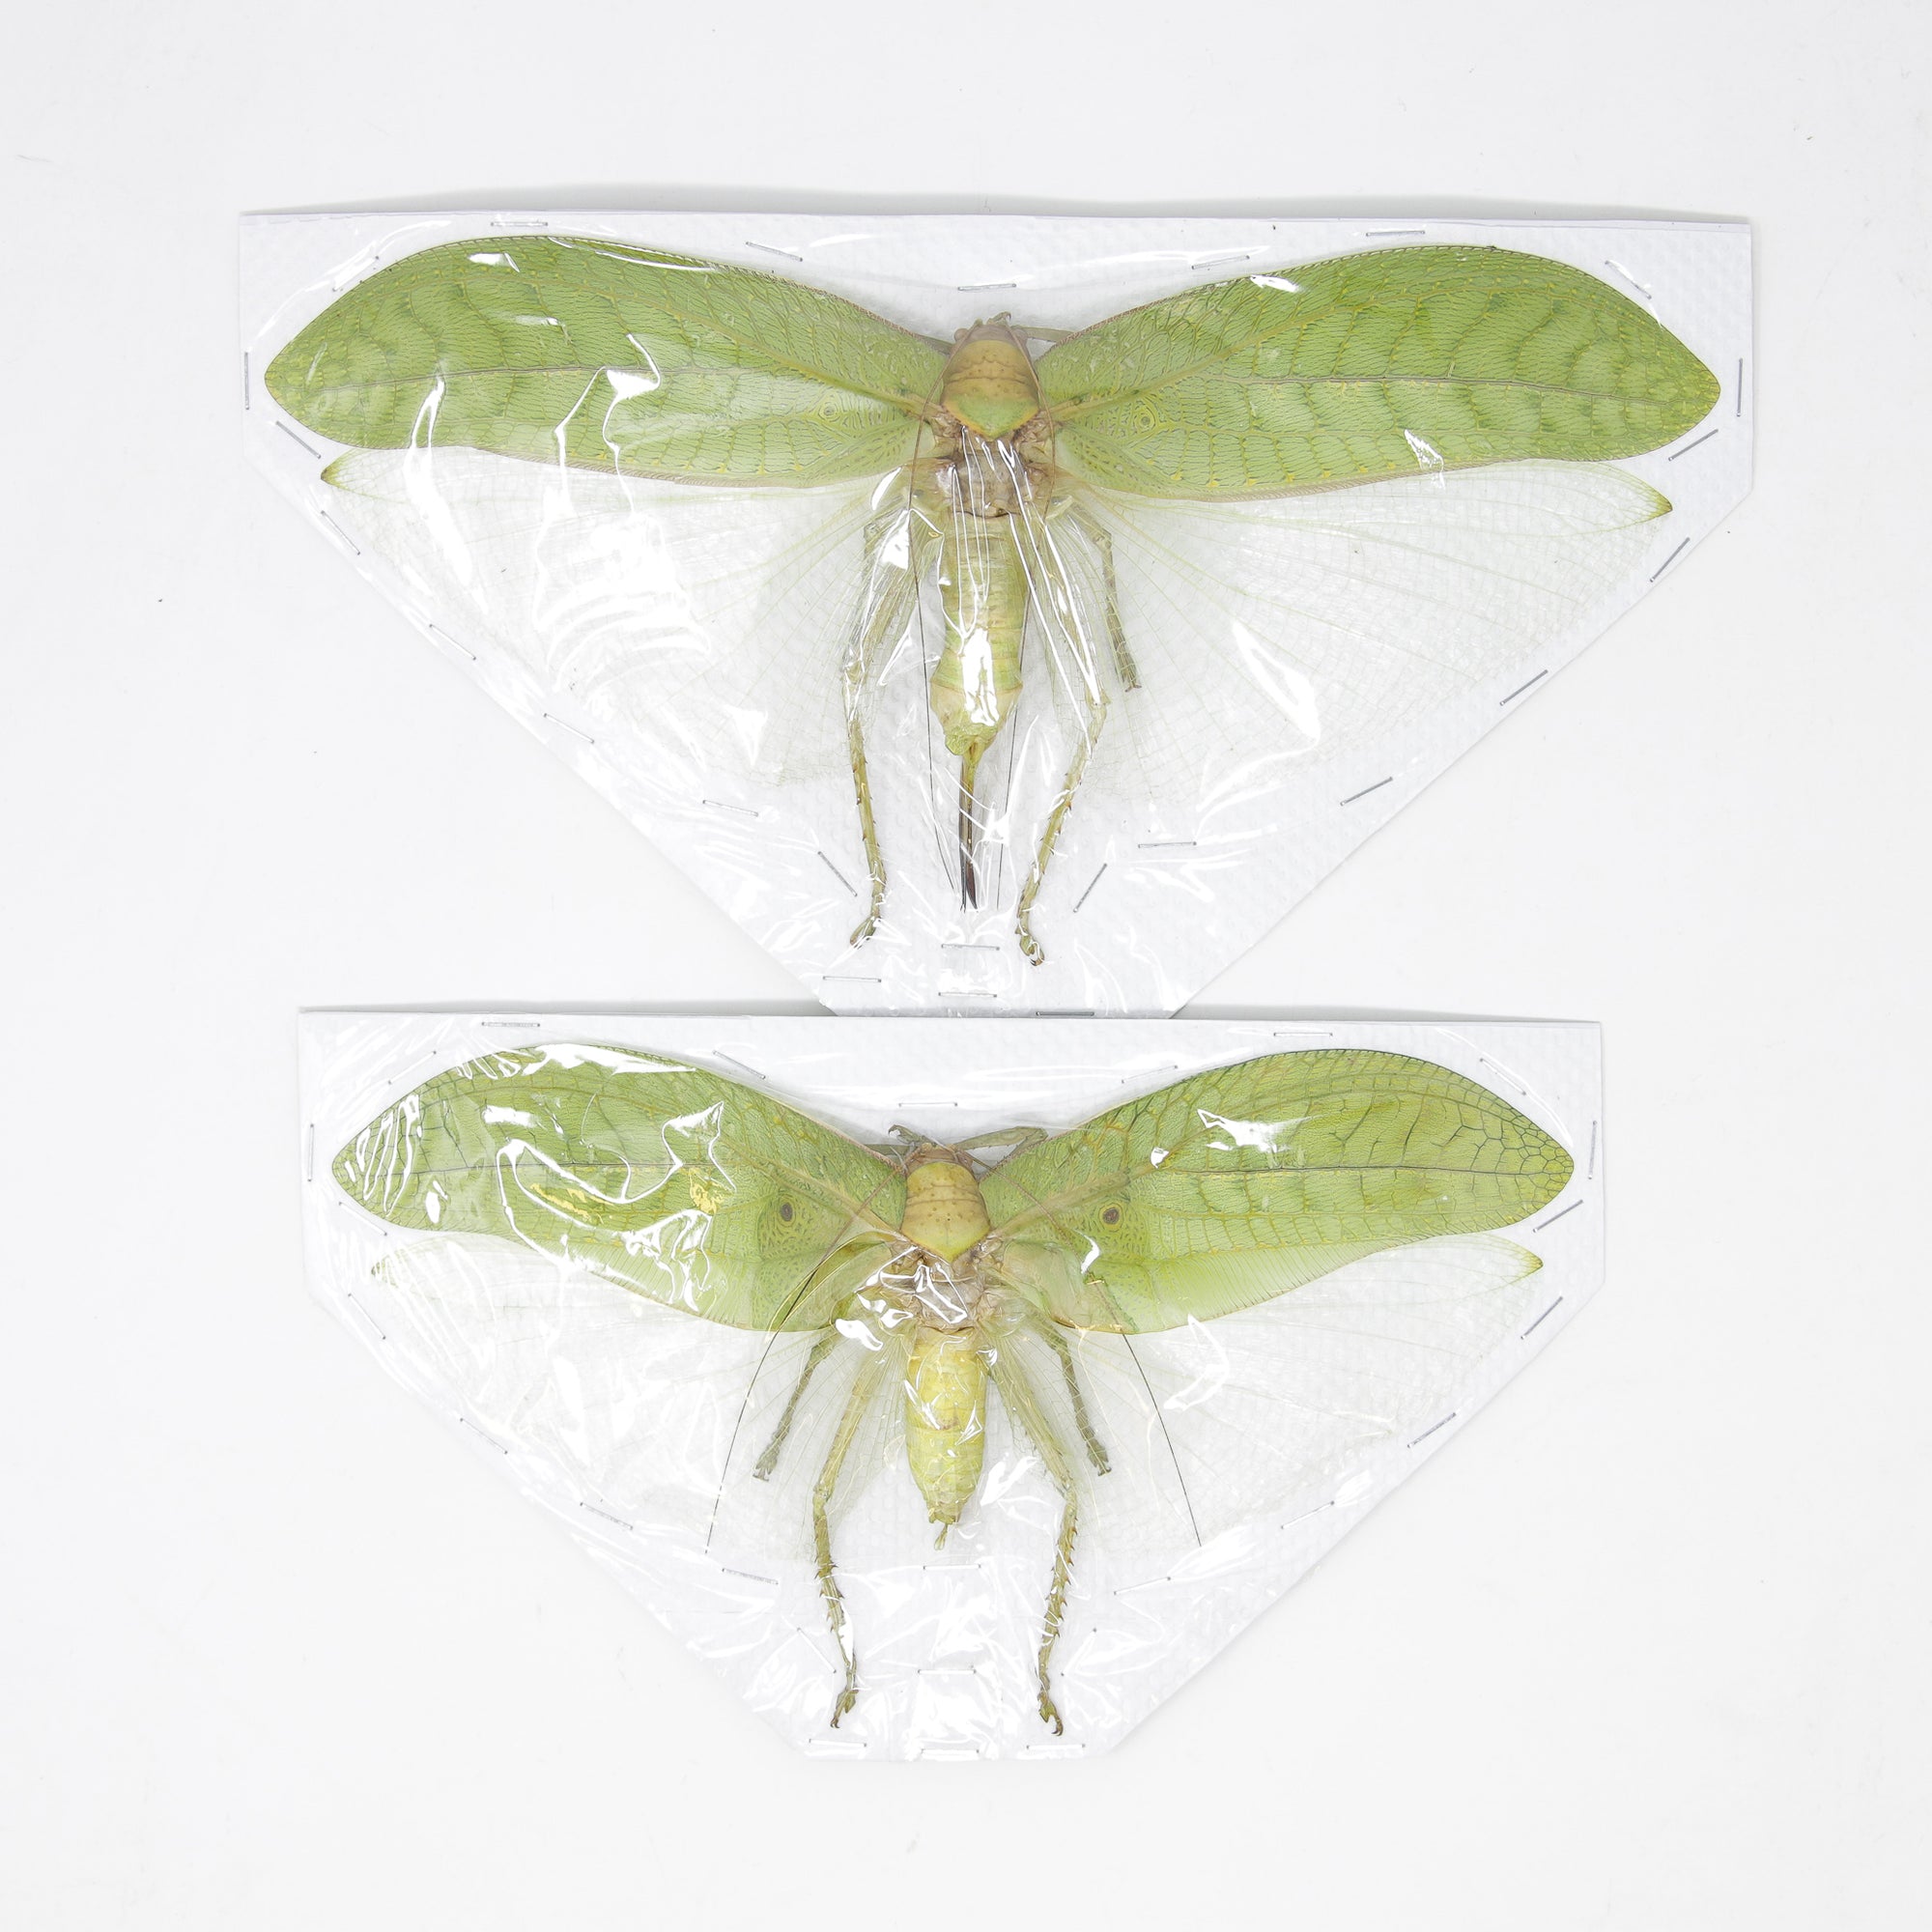 Pair of Hercules Leaf Mimic Katydids 8 Inch Wingspan (Pseudophyllus hercules) Spread Specimens A1 Quality Real Insect Entomology